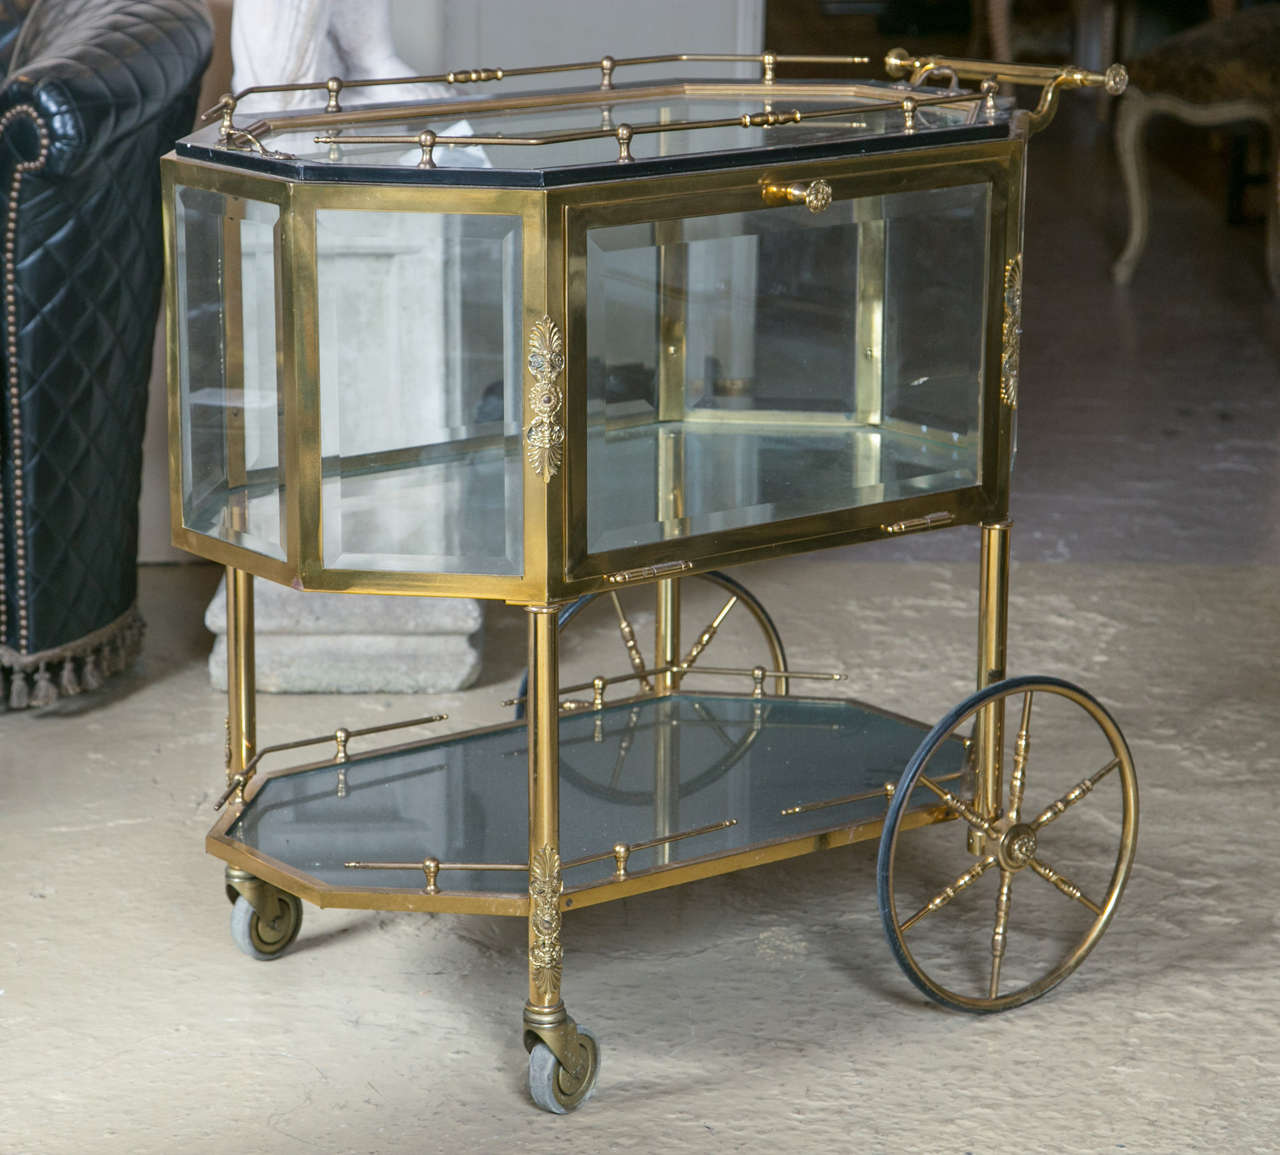 Bronze and glass vitrine serving tea wagon. Large brass wheels make this rolling cart easy to maneuver. The all beveled glass case with pull down side to allow for easy access. The upper and lower with bronze galleries. The whole with a handle for